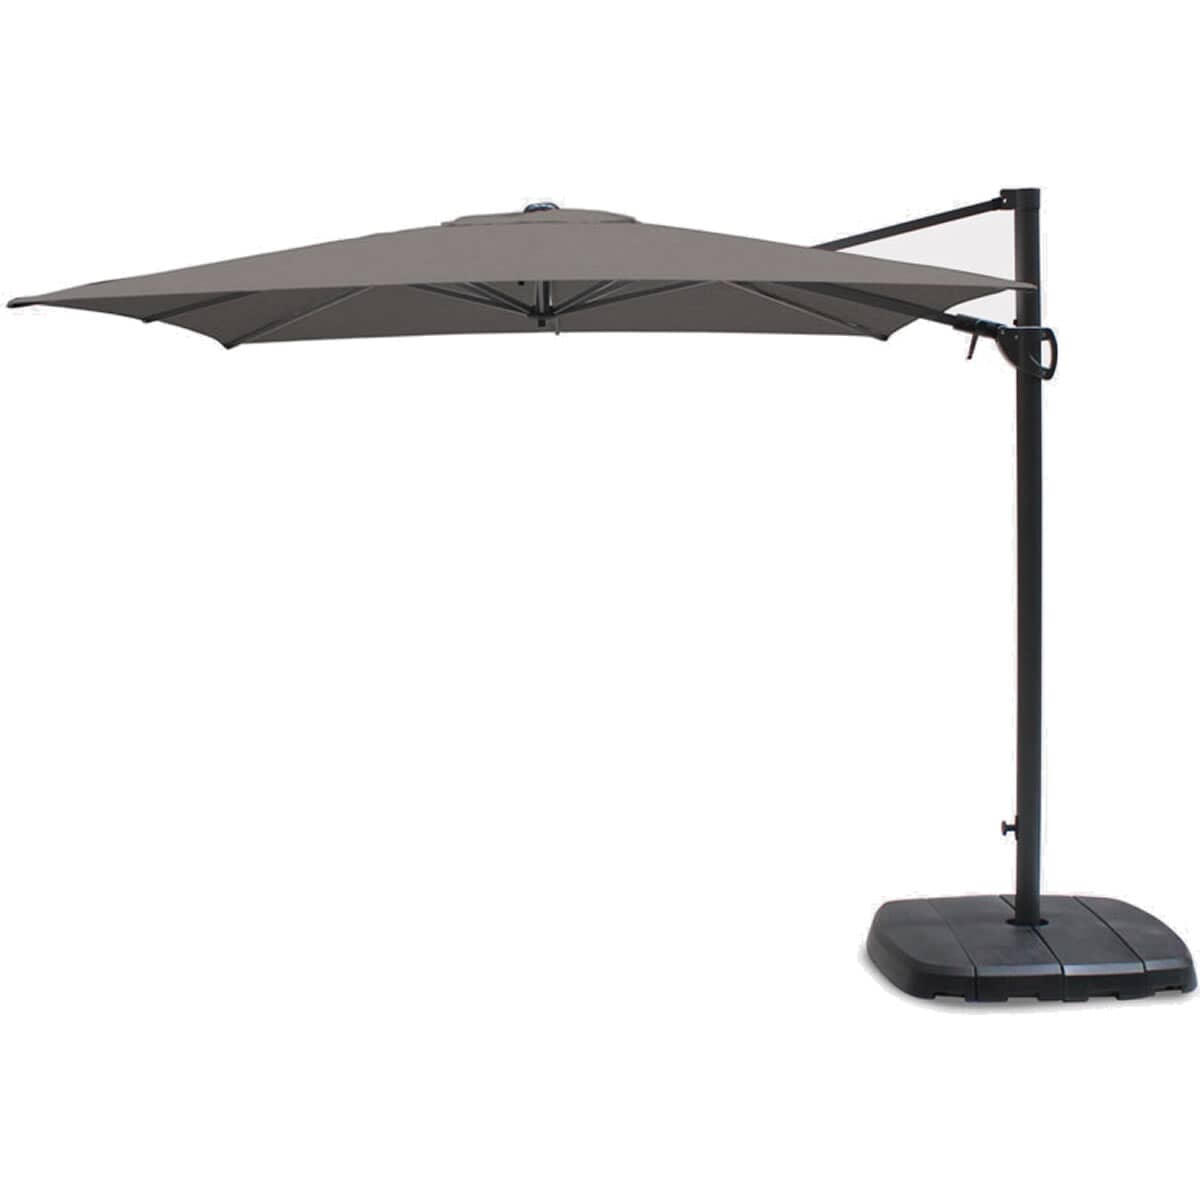 Kettler 2.5m Square Free Arm Parasol - Grey Frame/Grey Taupe Canopy with Base